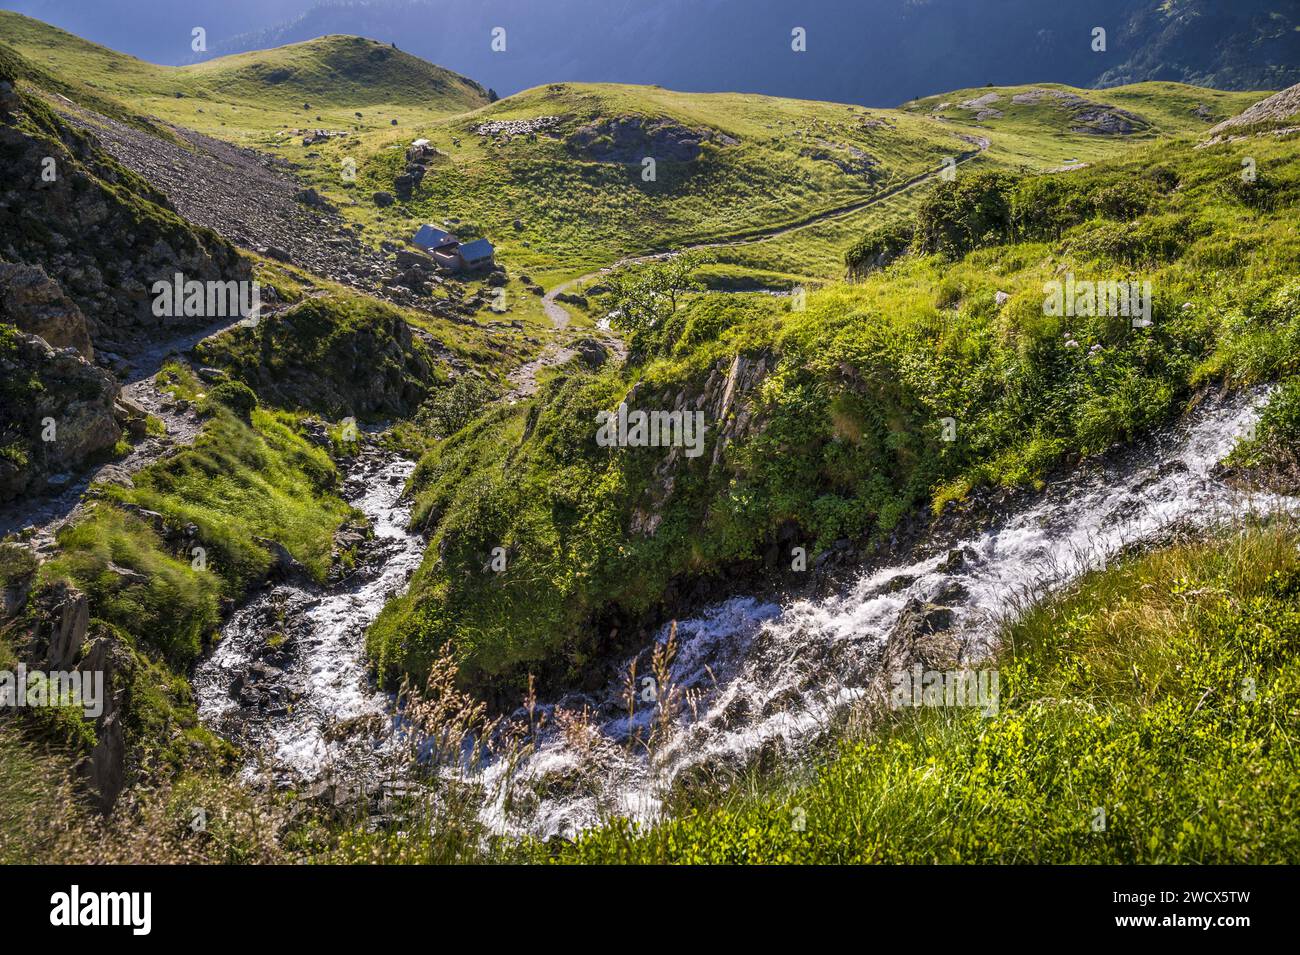 France, Pyrenees Atlantiques, Béarn, Ossau valley, Pyrenees National Park, waterfall leading to the Roumassot hut and its herd of ewes and goats in summer pasture Stock Photo